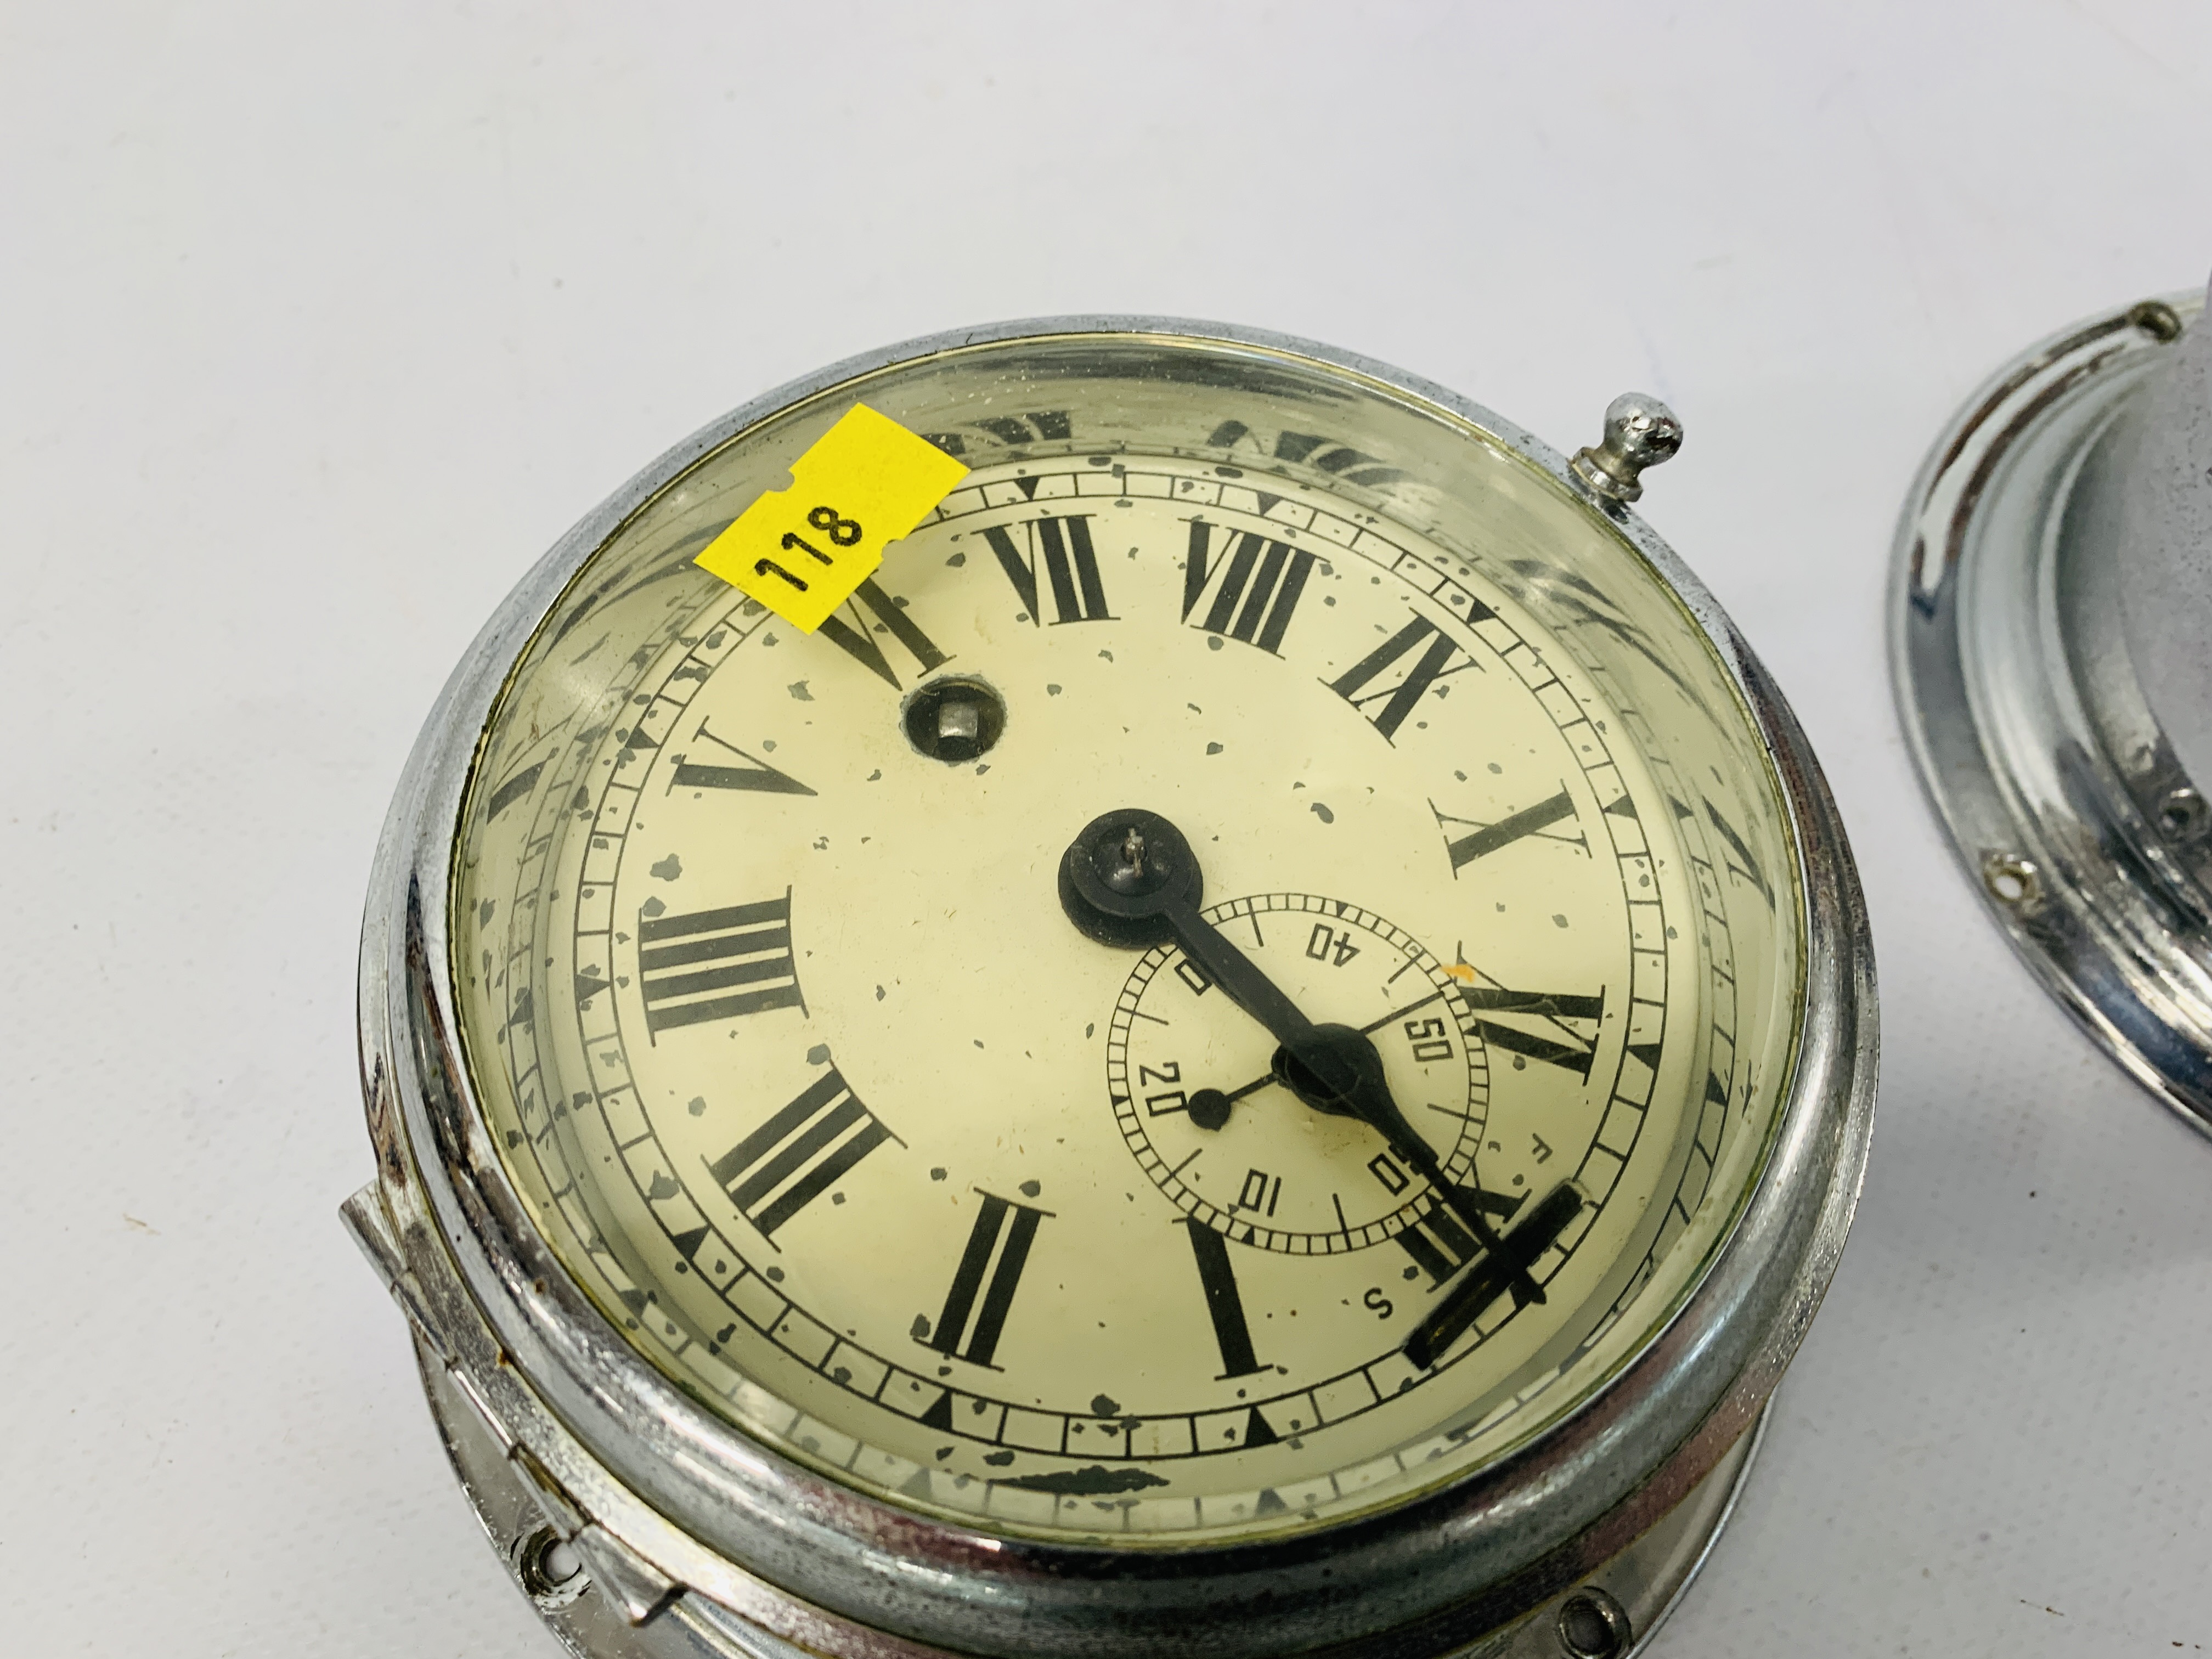 A CHROME CASED NAUTICAL CLOCK AND MATCHING ANAROID BAROMETER (REMOVED FROM 1930'S SAILING YACHT) - Image 5 of 5